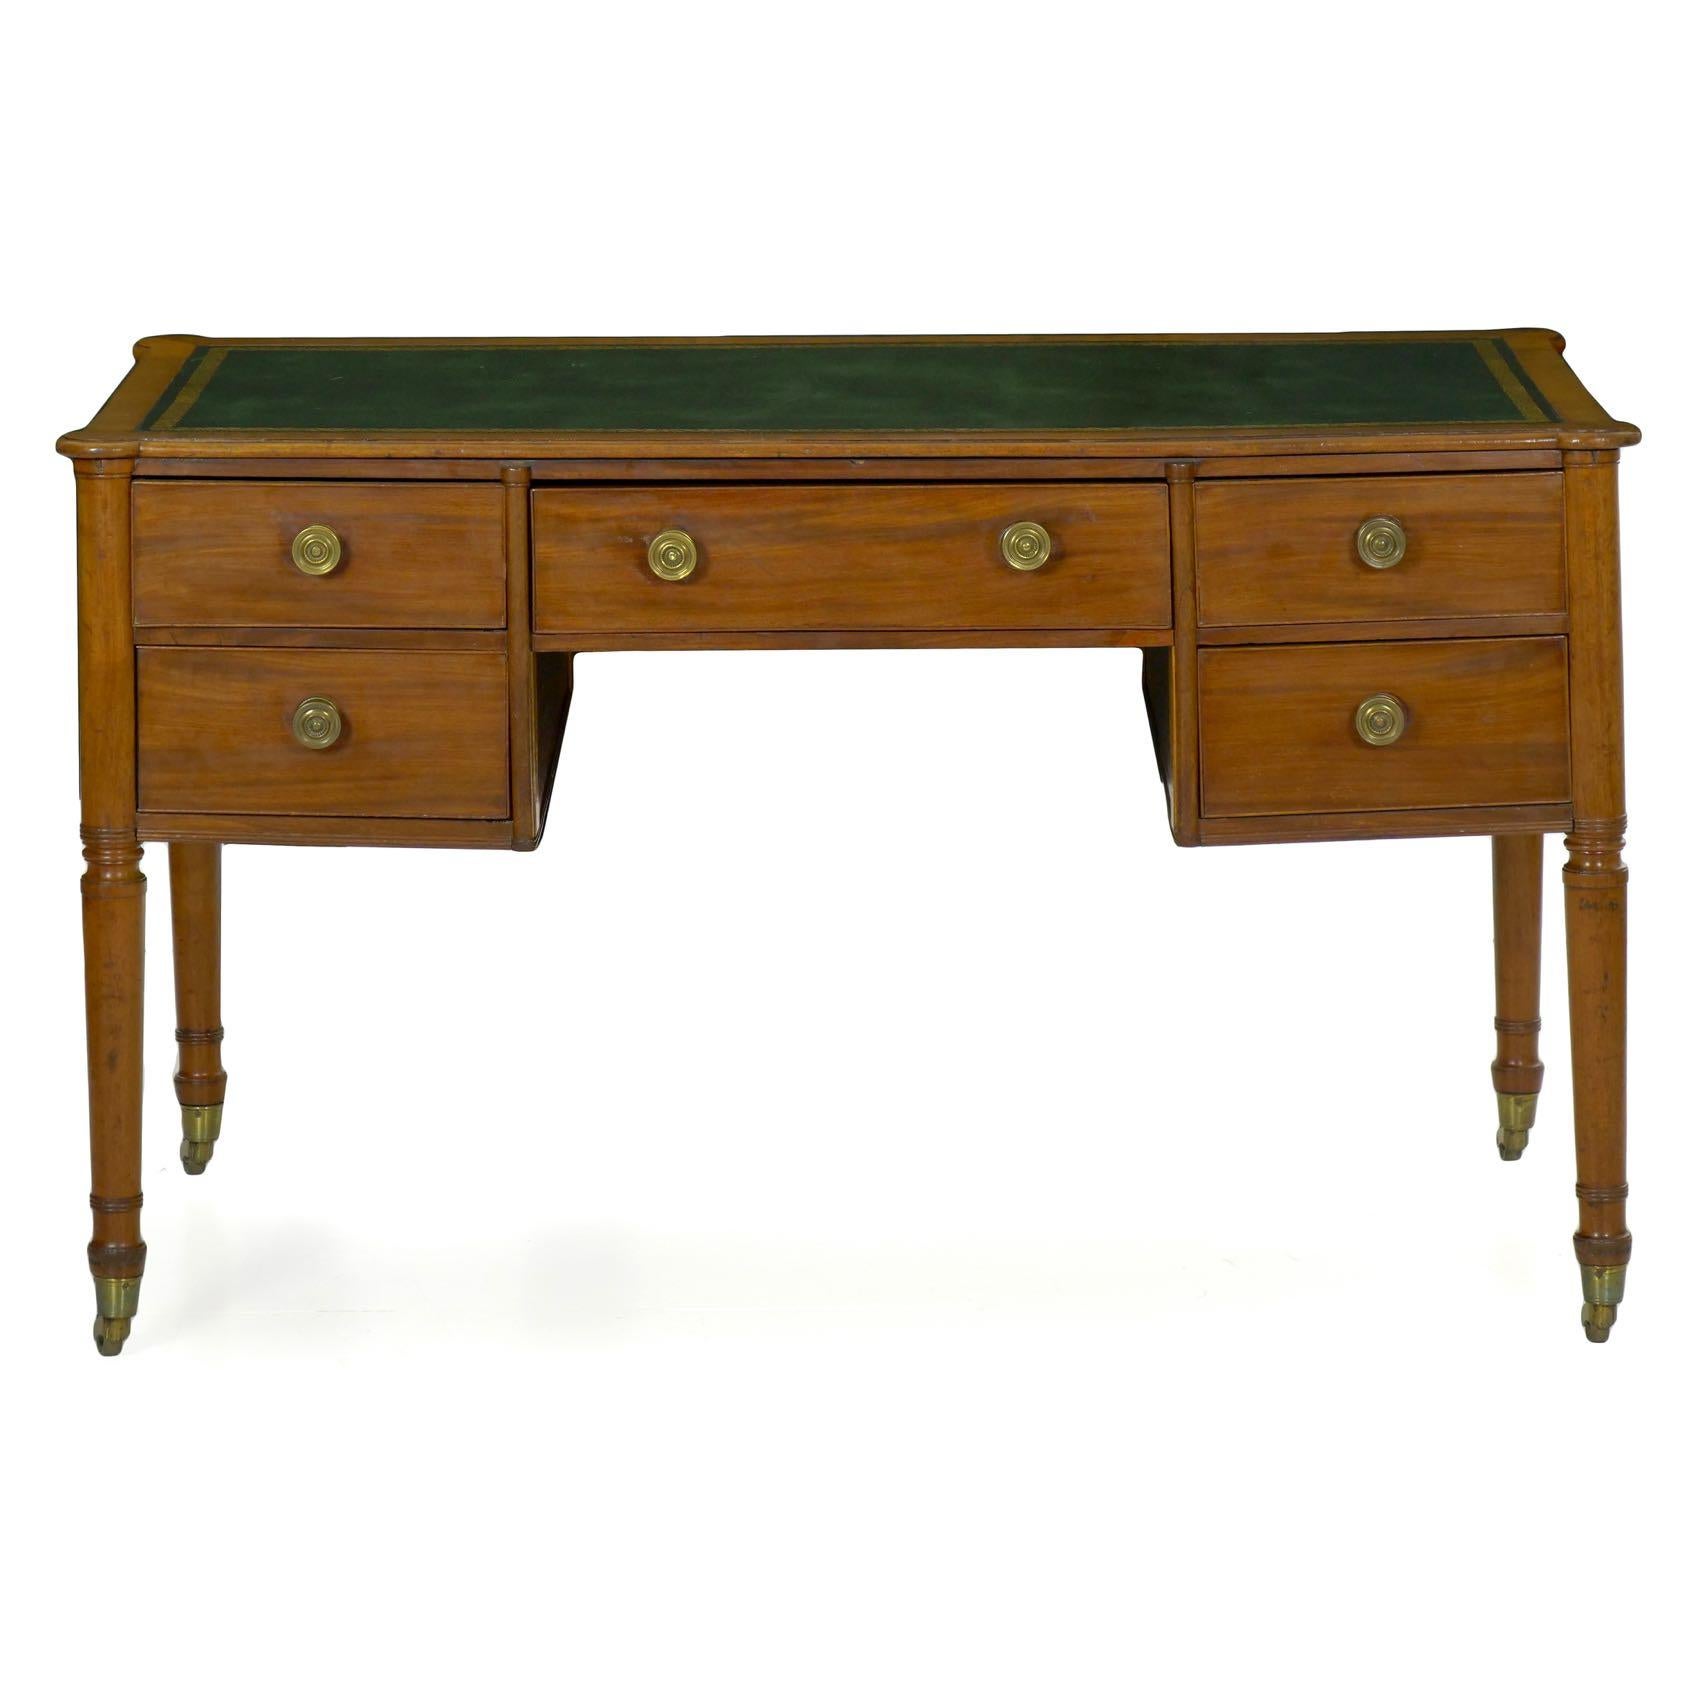 This handsome antique writing desk was at some point the centerpiece of a photograph with Queen Elizabeth signing a photograph or picture. A product from the second quarter of the 19th century, it is crafted in dense mahogany that has faded